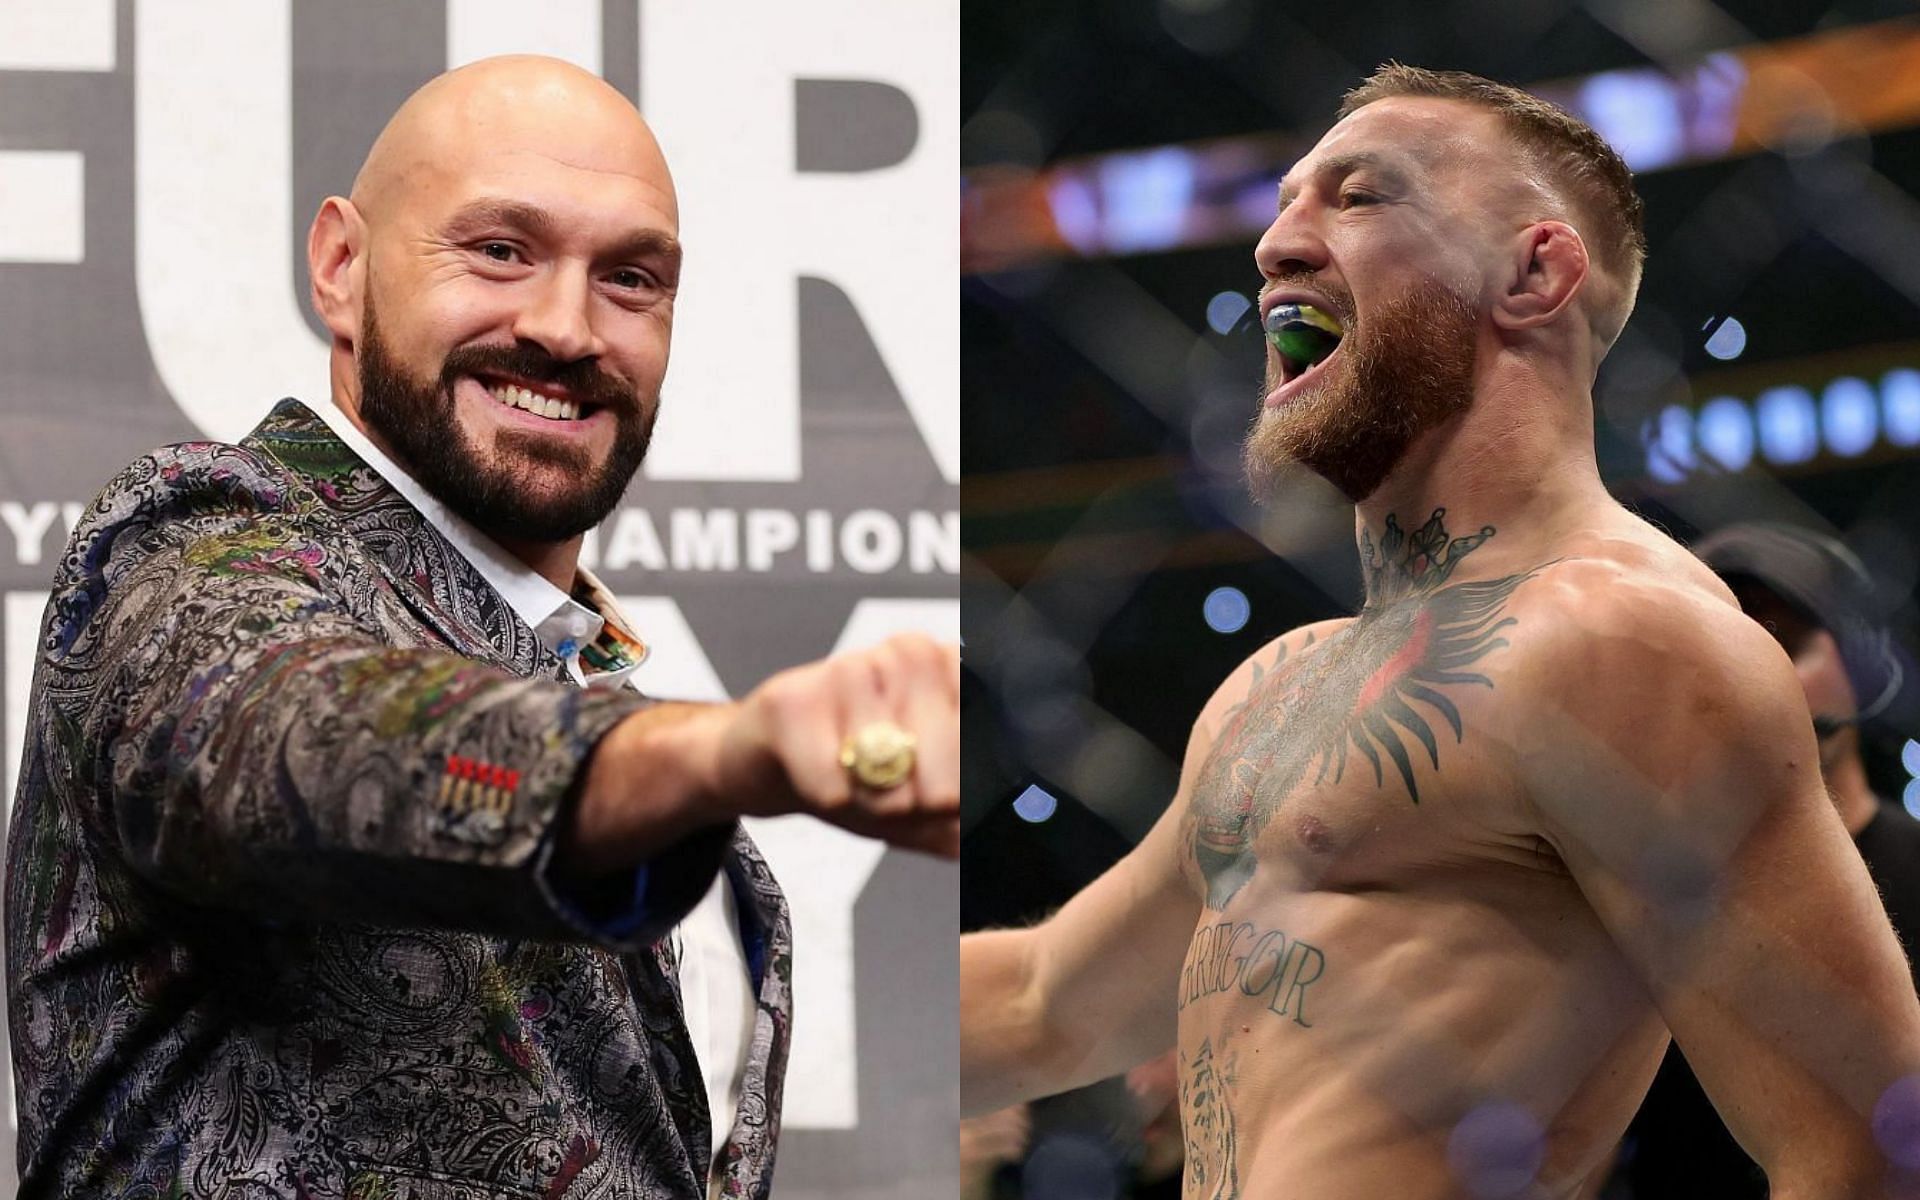 Tyson Fury plays down any potential beef between himself and Conor McGregor